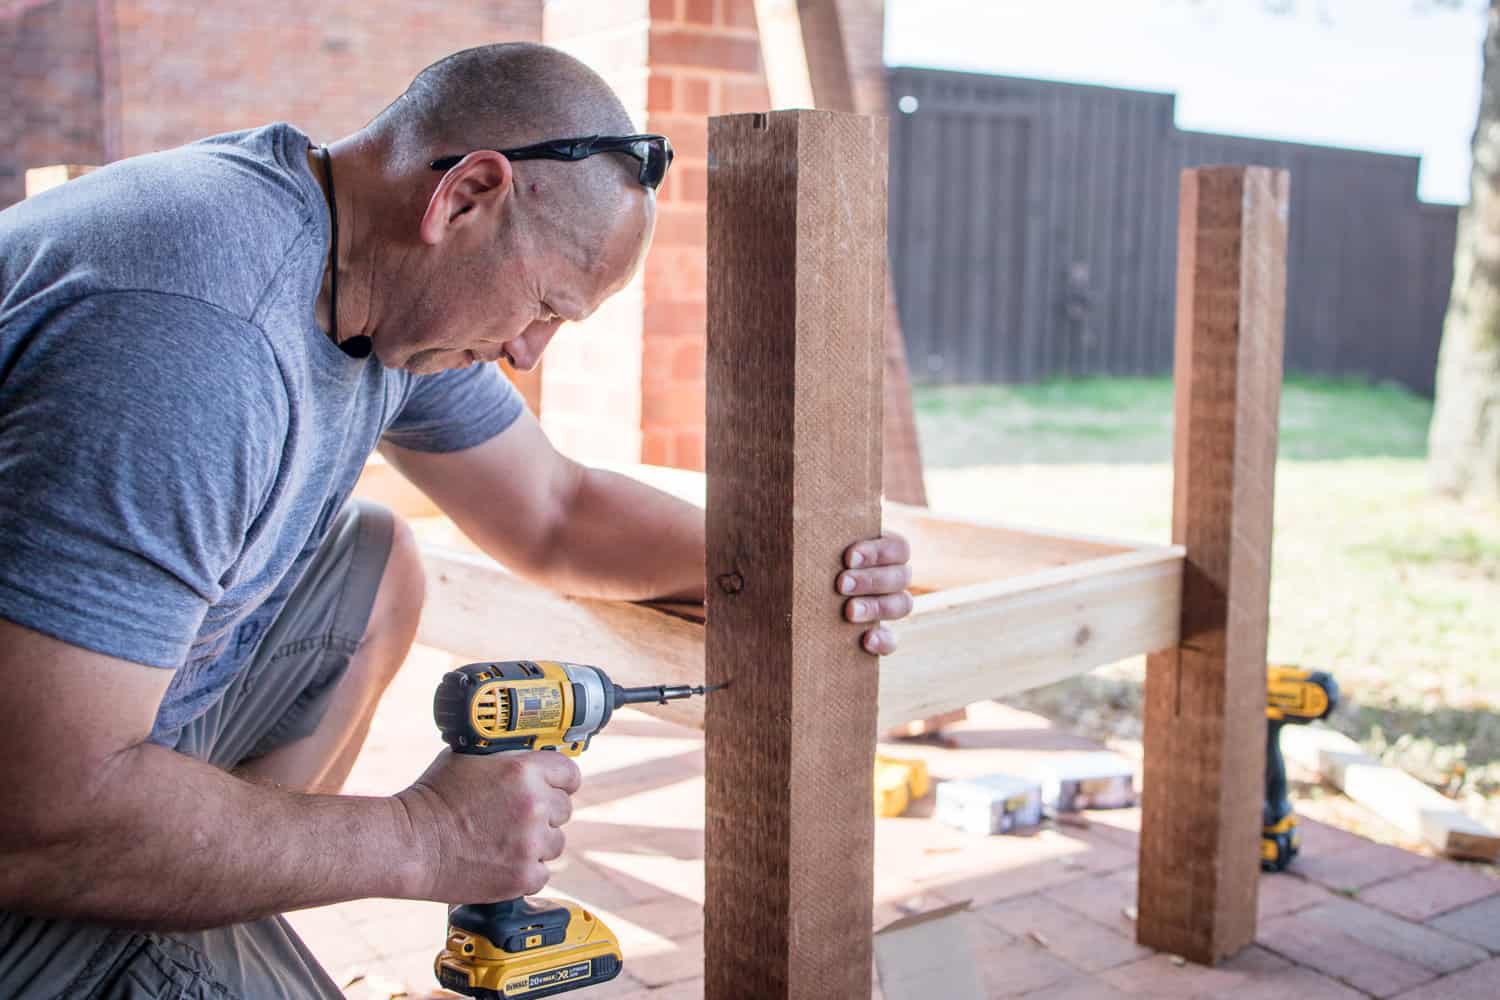 Side view of a DIY man as he uses a cordless electric power screwdriver to place screws into a wooden post while building a backyard container garden planter.